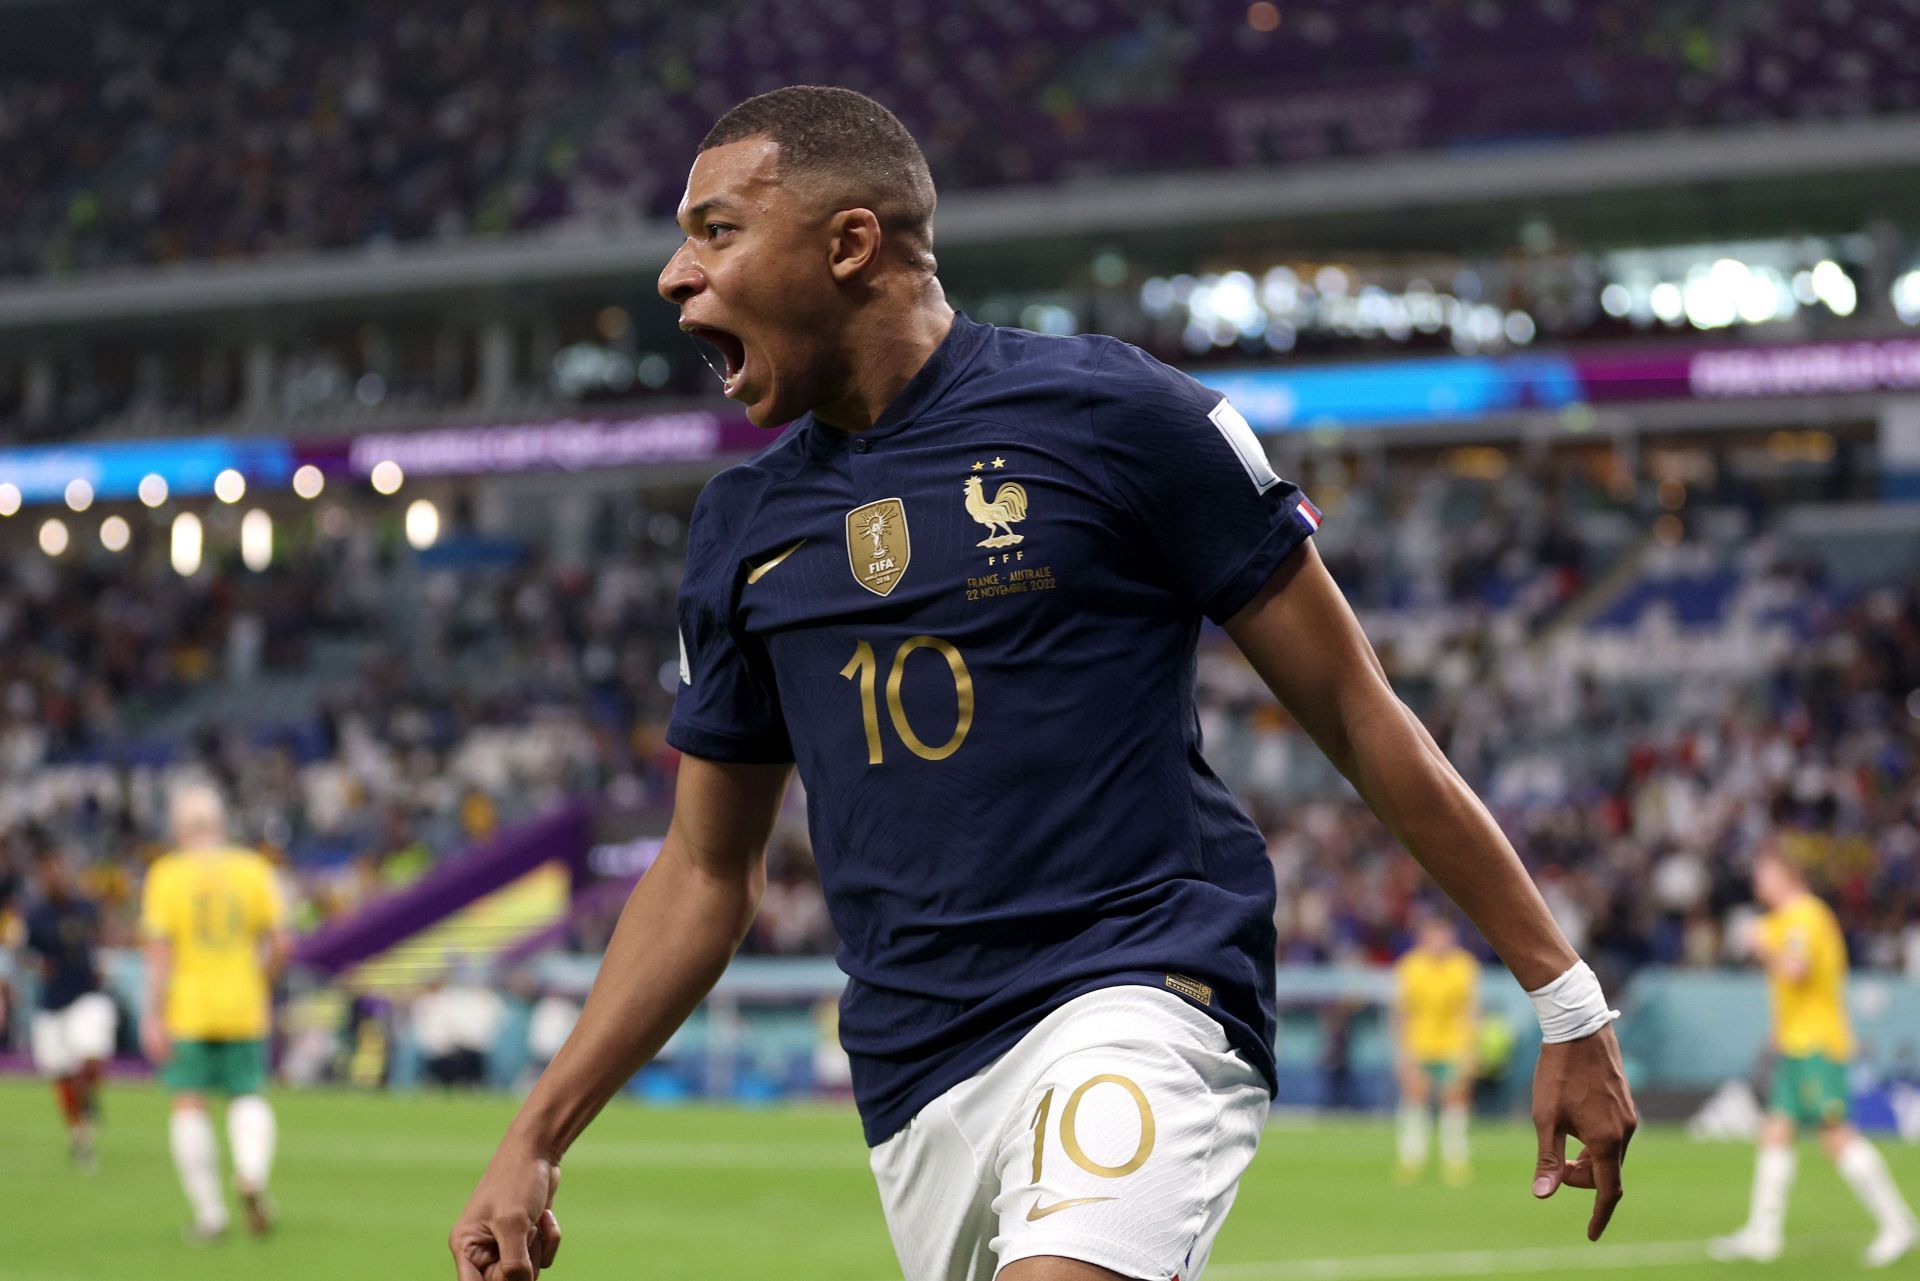 Kylian Mbappe enjoyed a prolific World Cup campaign.